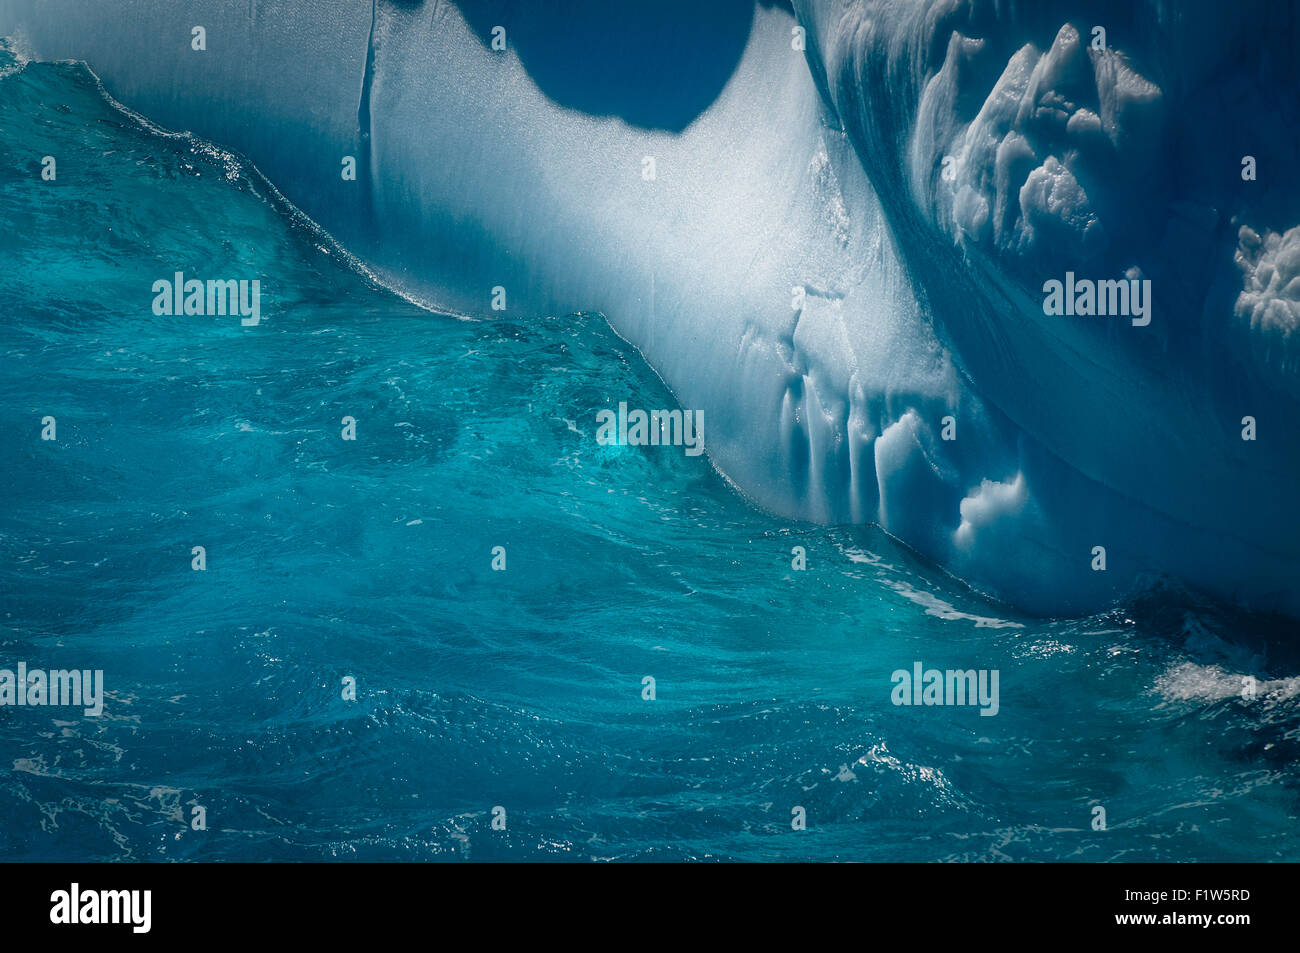 A detail shot of a large blue iceberg from Antarctica Stock Photo